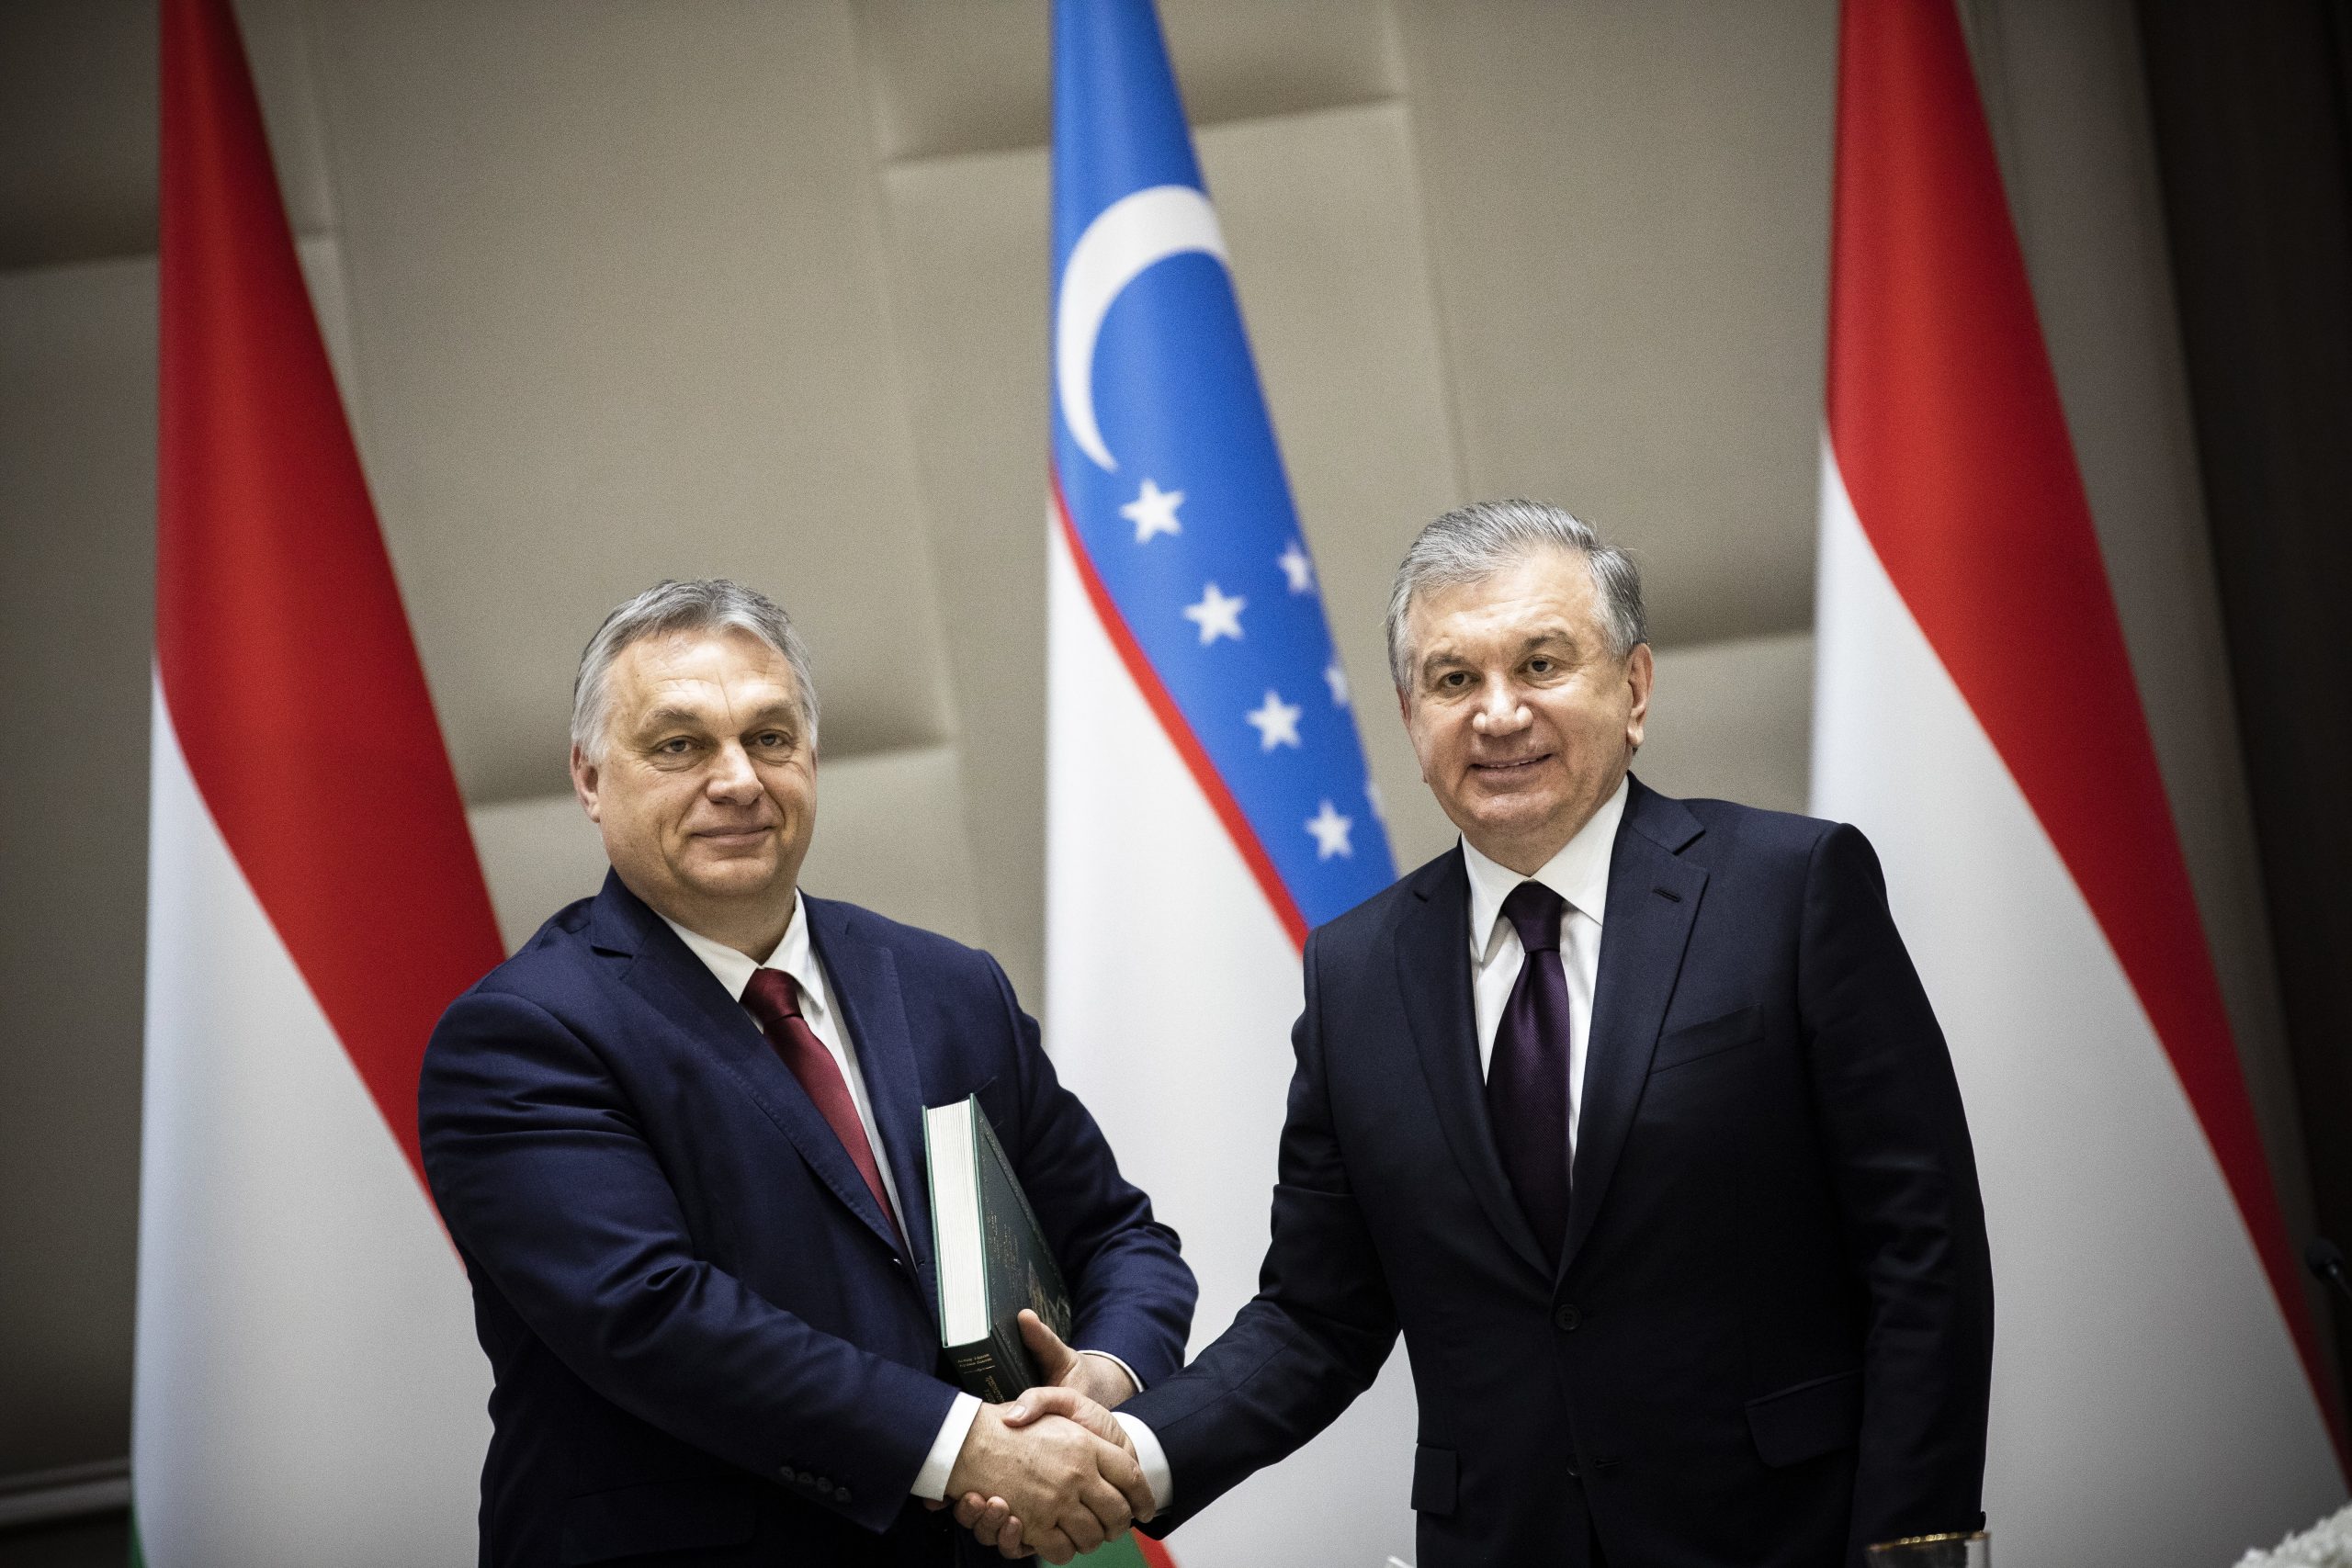 Orbán: Hungarians and Uzbeks 'Held Hands at the Right Time'